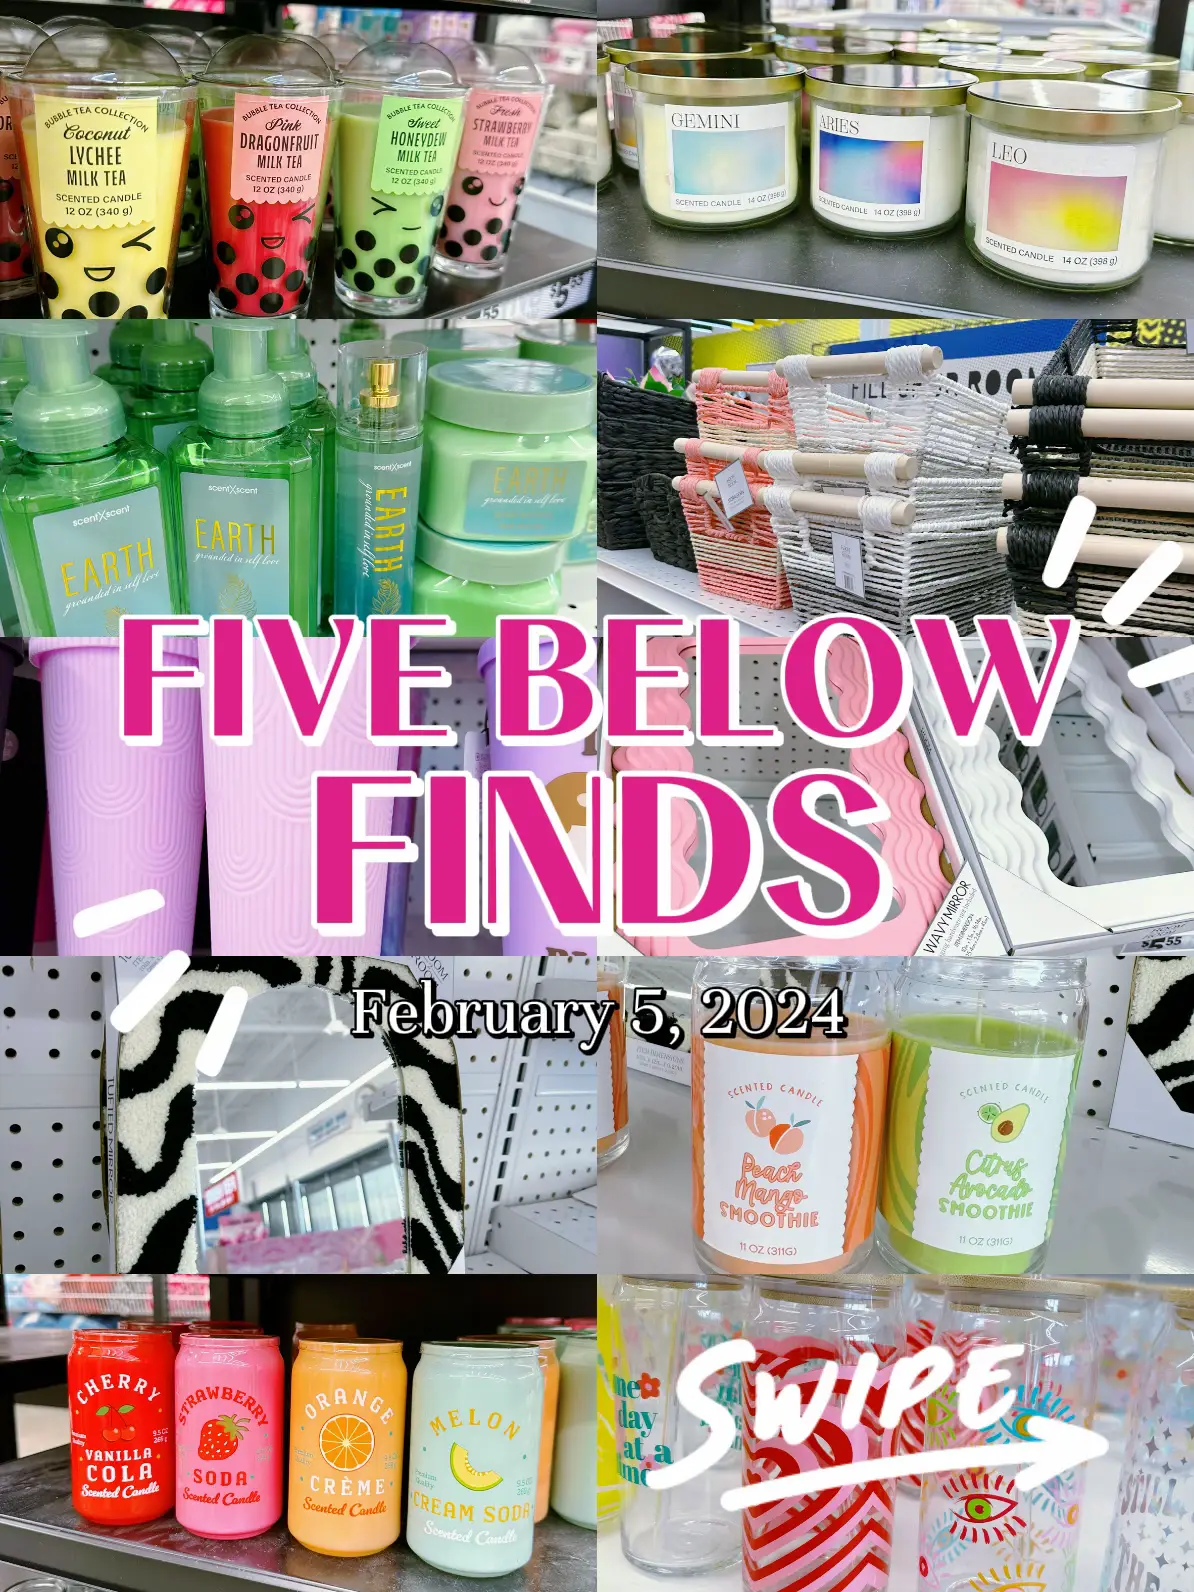 5 Hellow Finds Gifts for Bf - Lemon8 Search